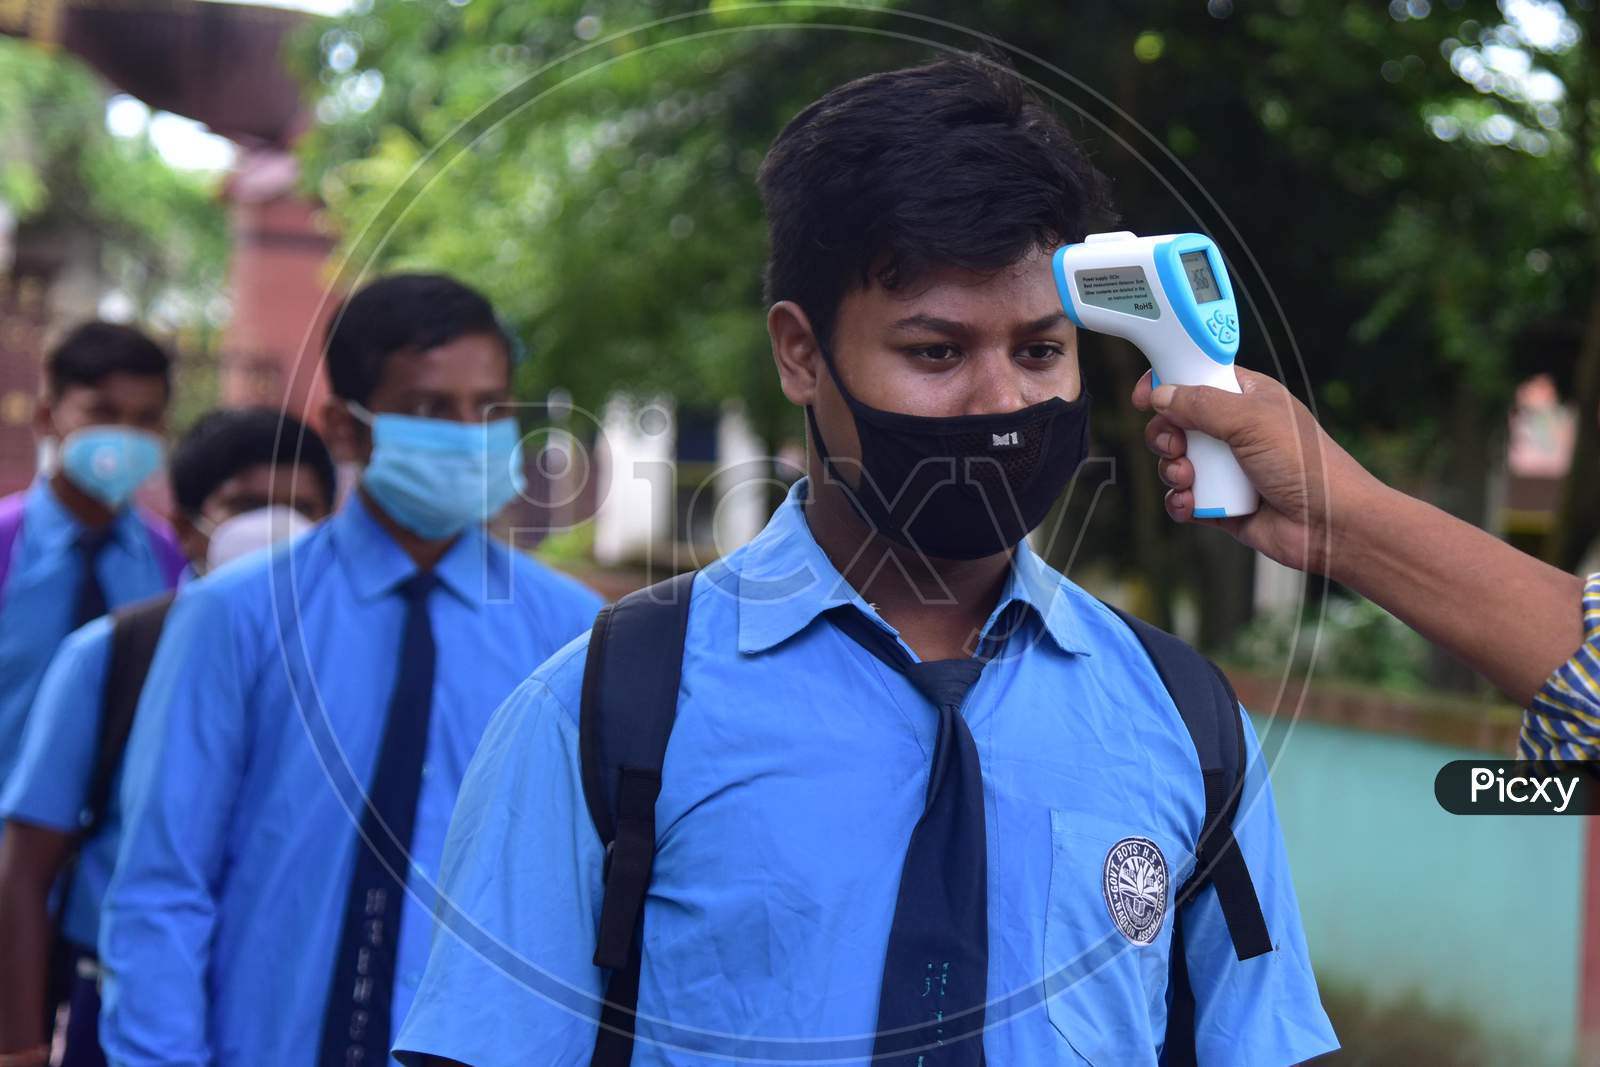 A student  gets his  body temperature check at the entrance gate of a school as schools reopened after more than 5-months closure due to the Covid-19 coronavirus pandemic in  Nagaon District of Assam on  sep 21,2020.